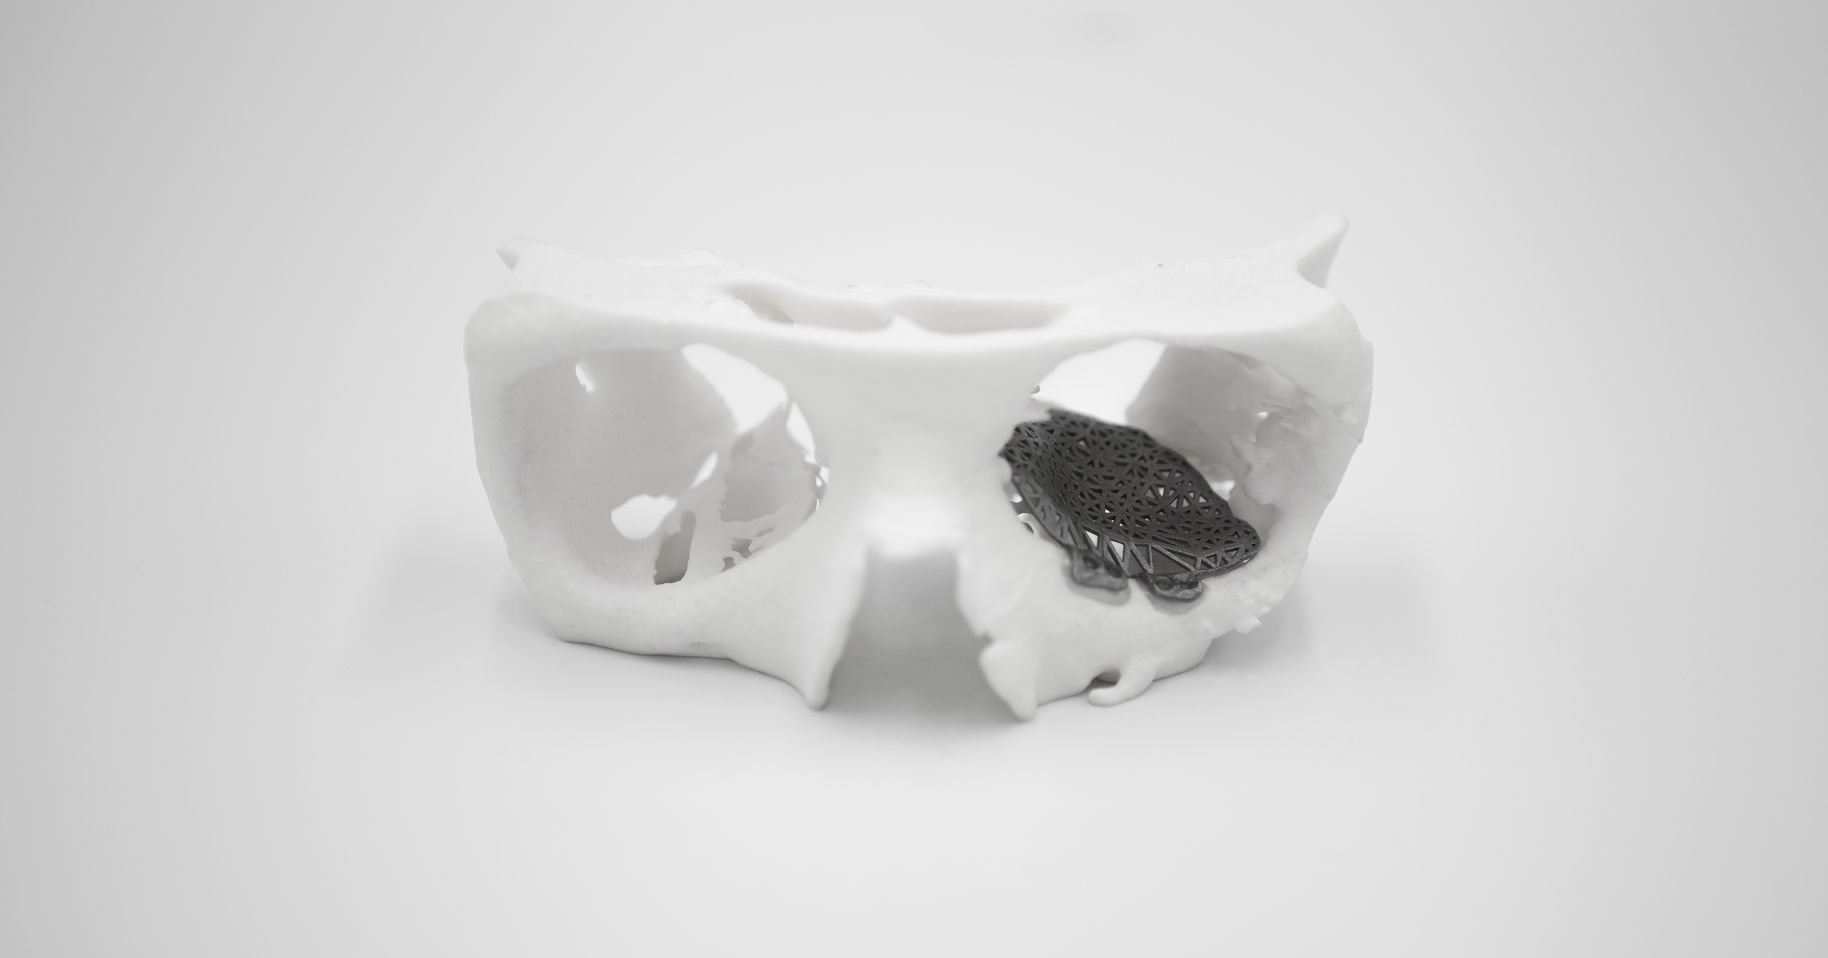 Patient-specific reconstruction with 3D modeling and DMLS additive manufacturing | Mika Salmi